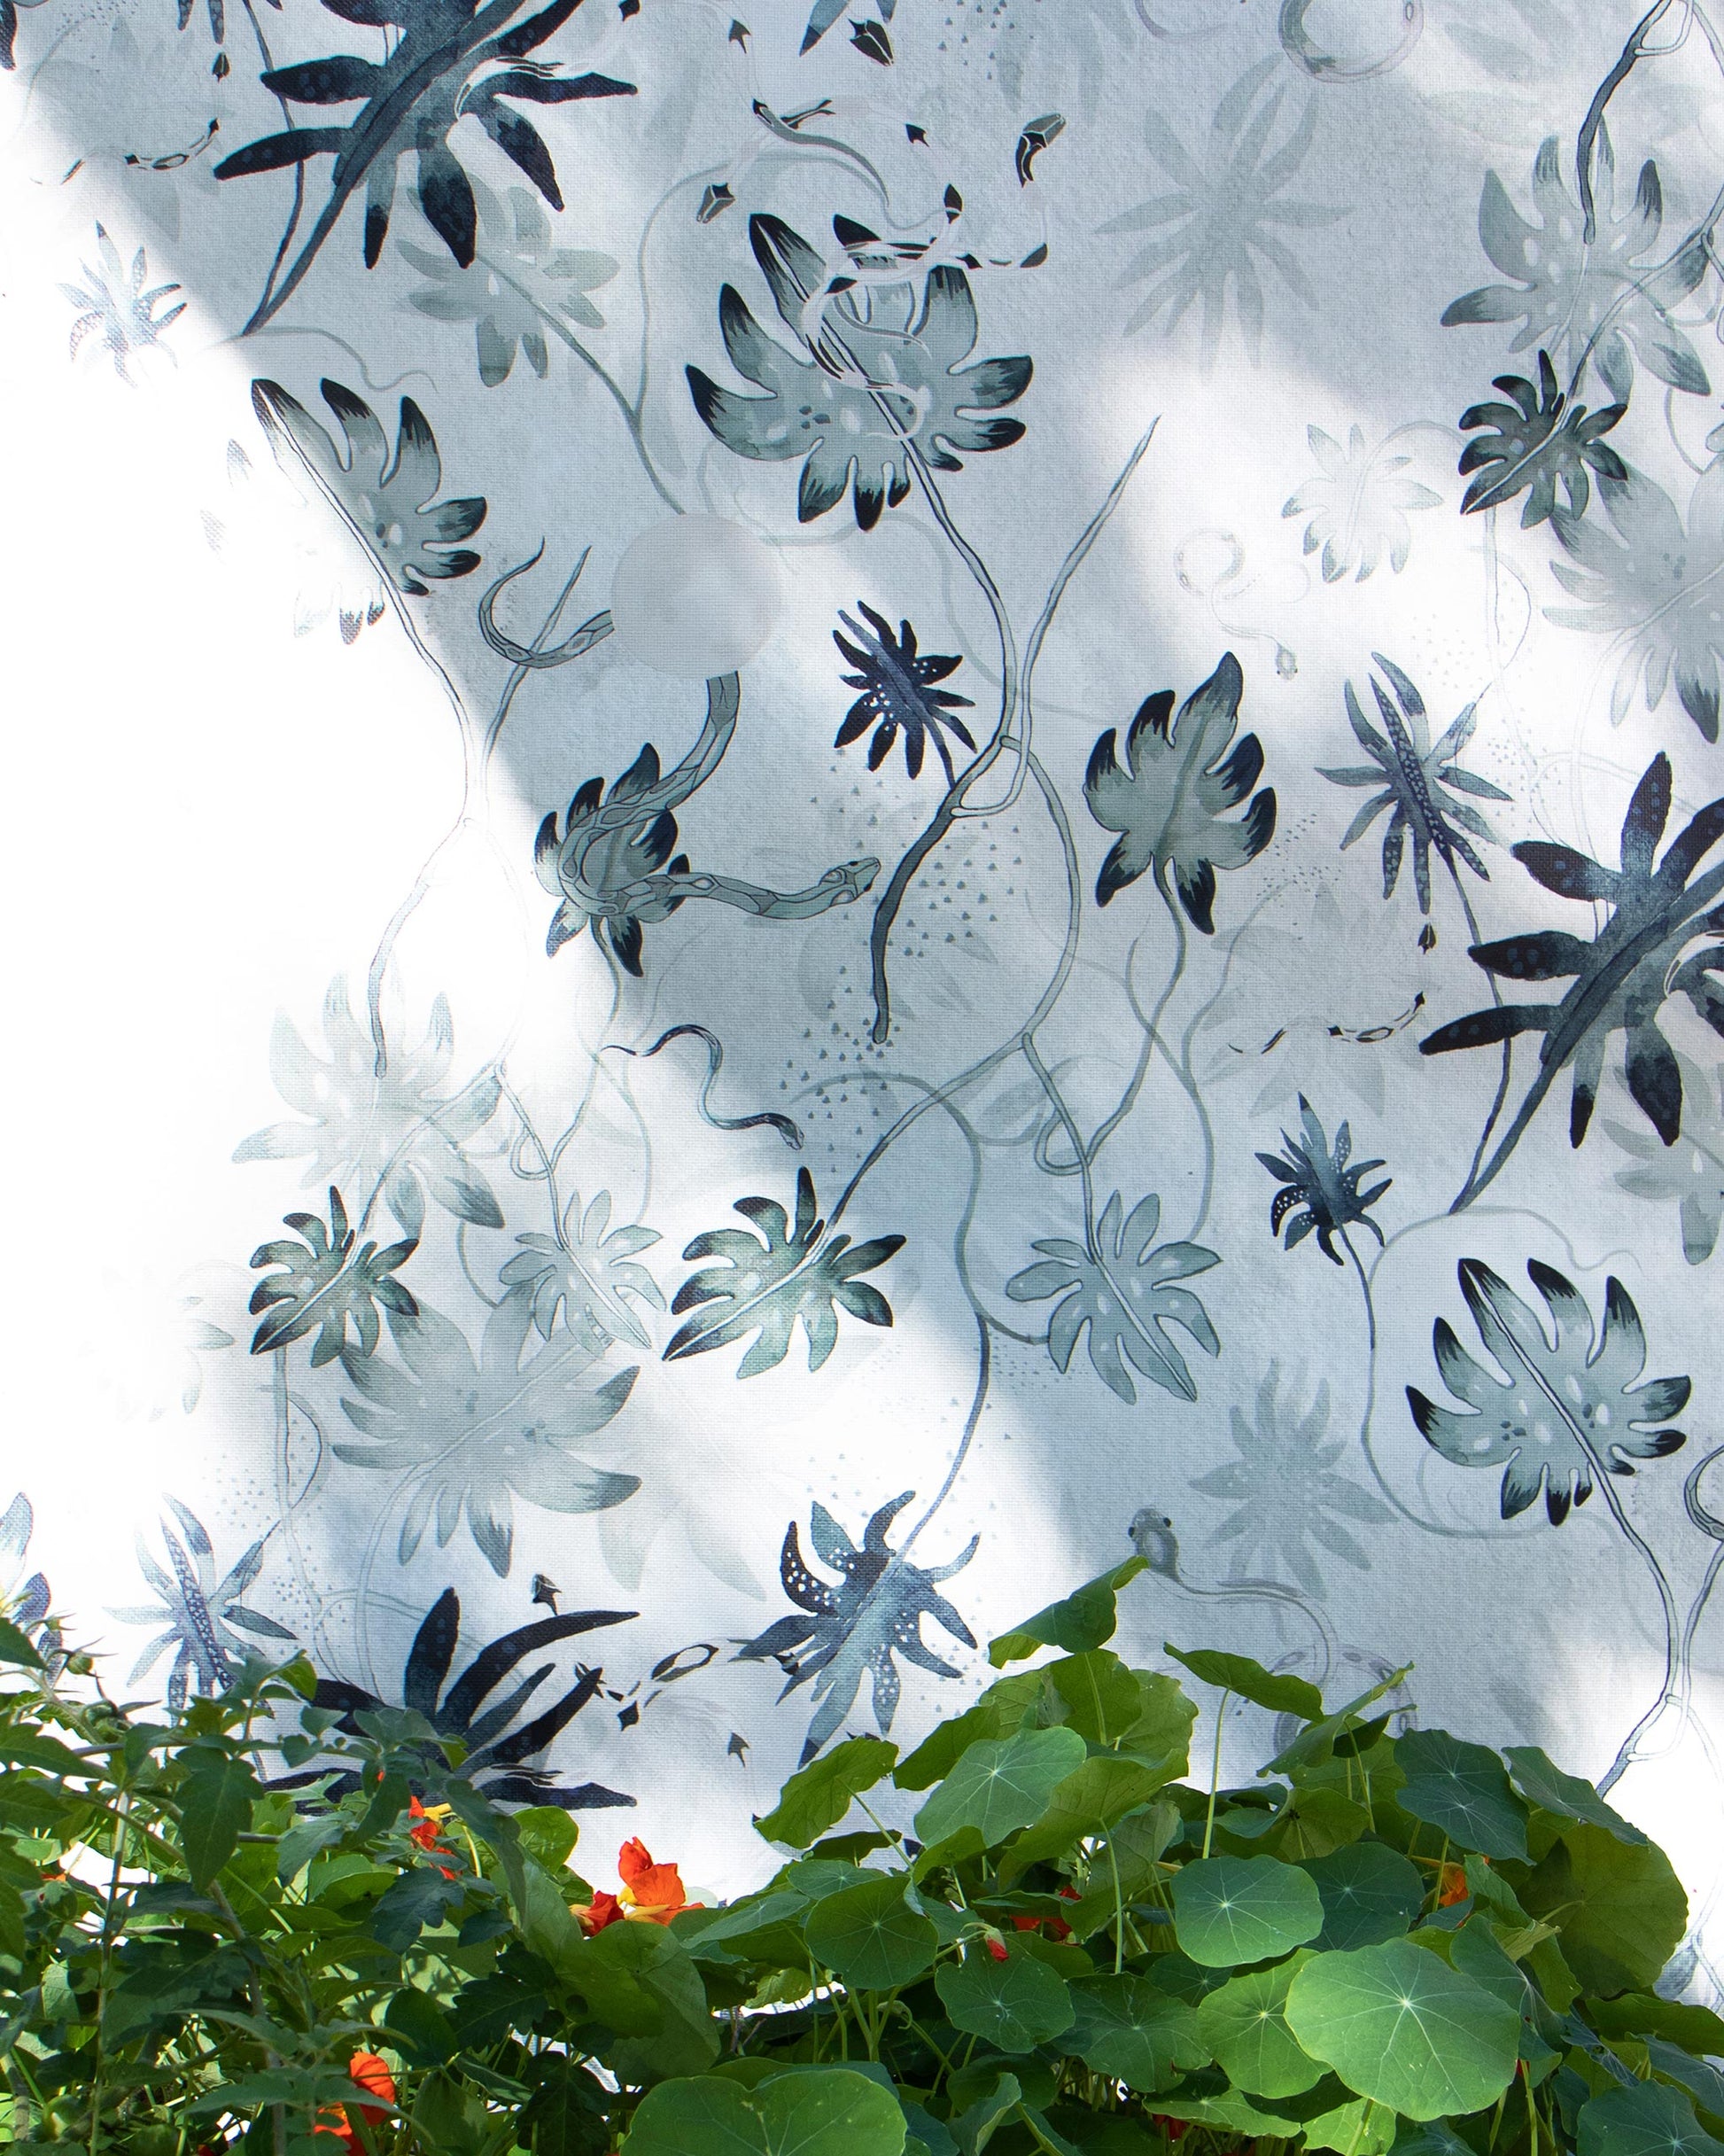 A wall with a lot of flowers, inspired by chinoiserie, Edera Paperweave Ice, and the Eskayel collaboration